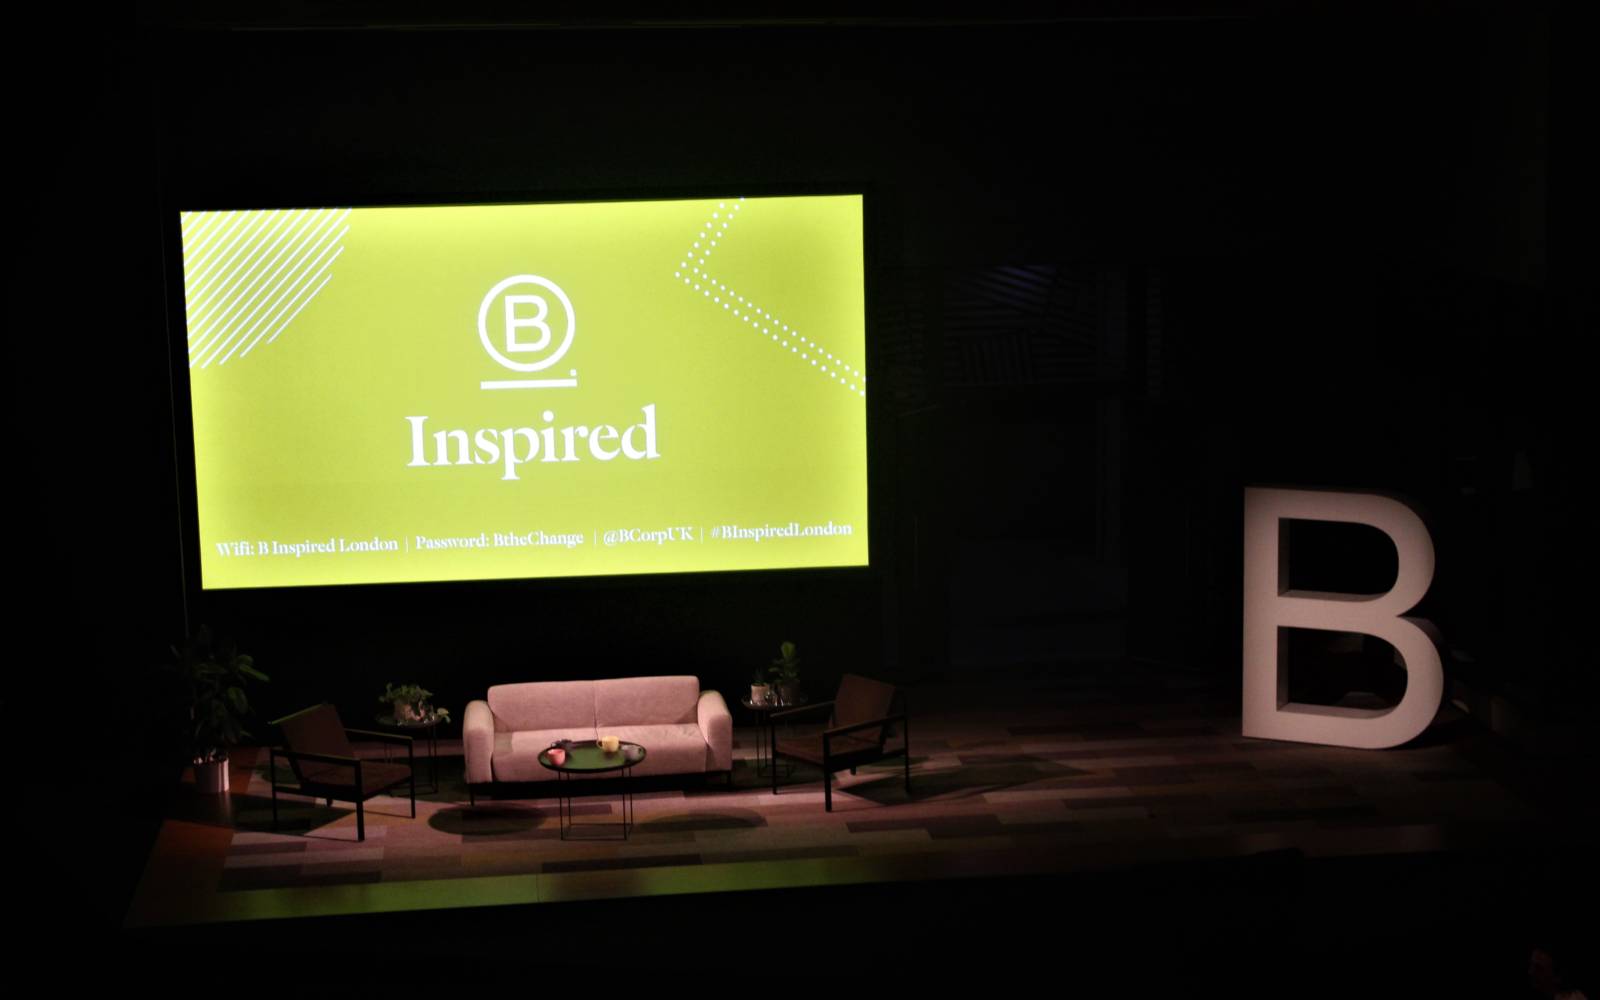 Photo of Bridge Theatre Stage. There is a big screen at the bag that has a green background and reads B Inspired. There is a sofa in front of this and a large B standing next to it.